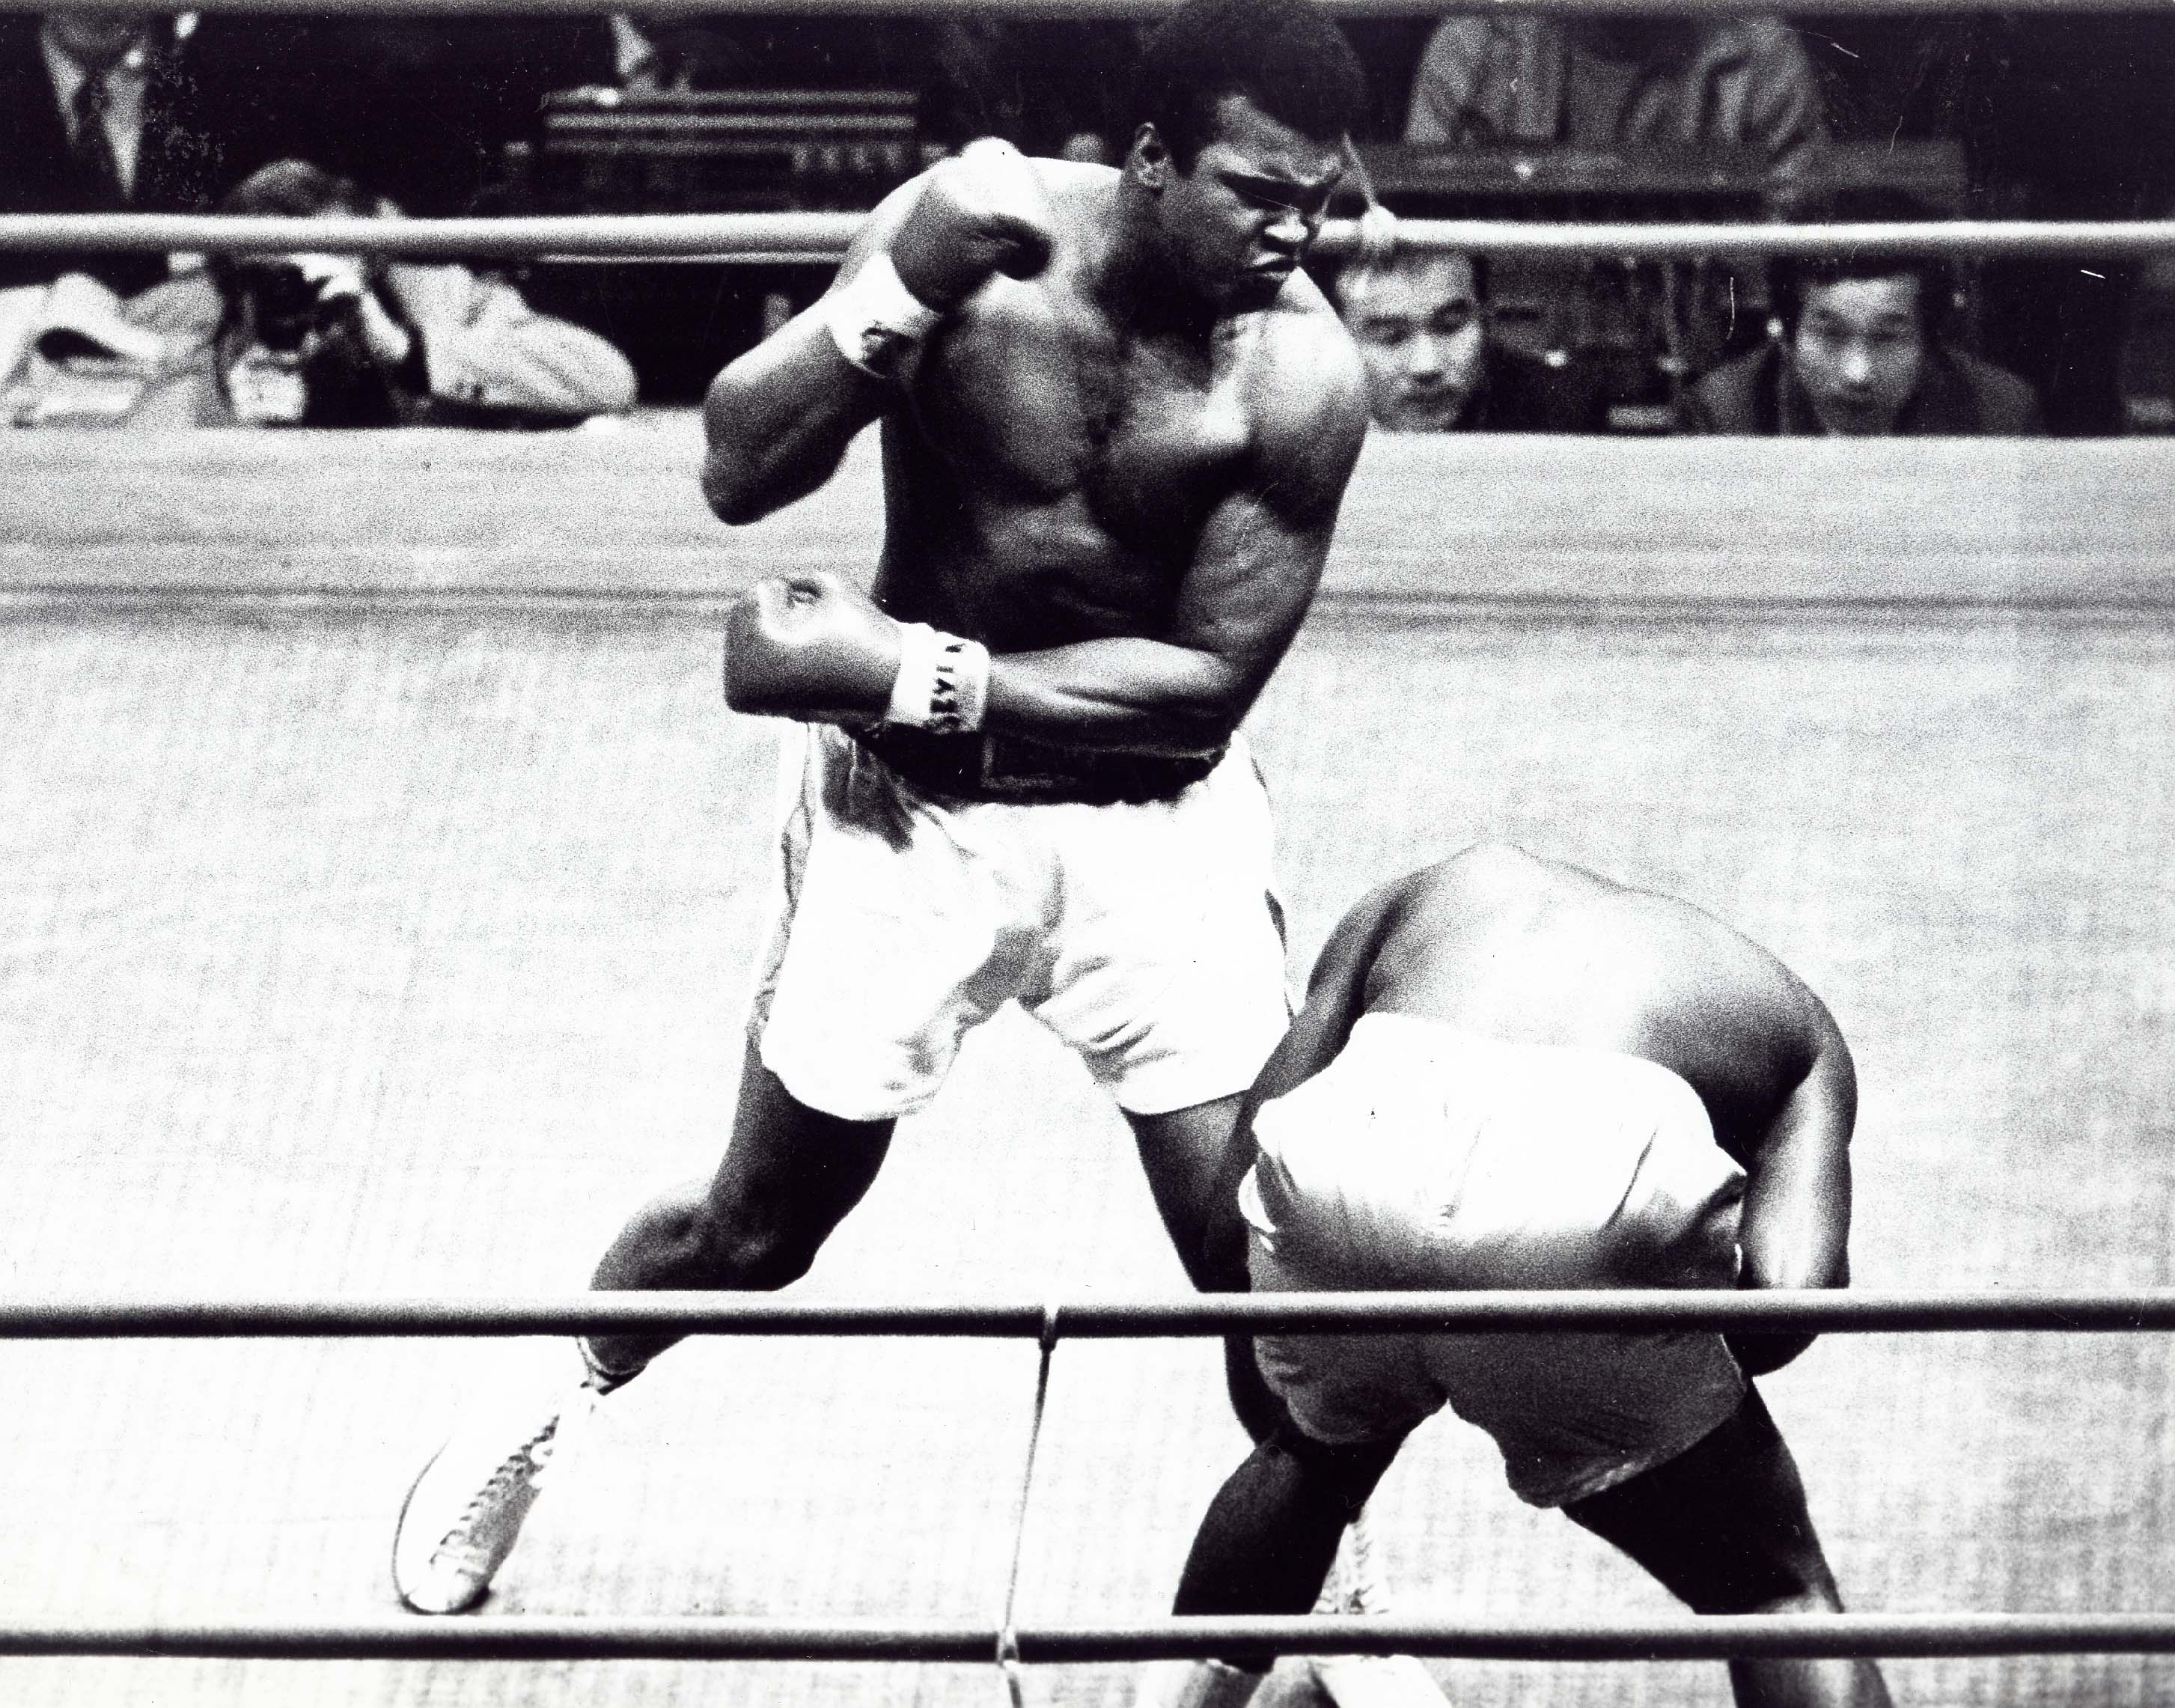 Nov. 30, 1972 - MUHAMMAD ALI wins match with Mac Foster. 1972., Image: 109630873, License: Rights-managed, Restrictions: , Model Release: no, Credit line: Profimedia, Zuma Press - Entertaiment